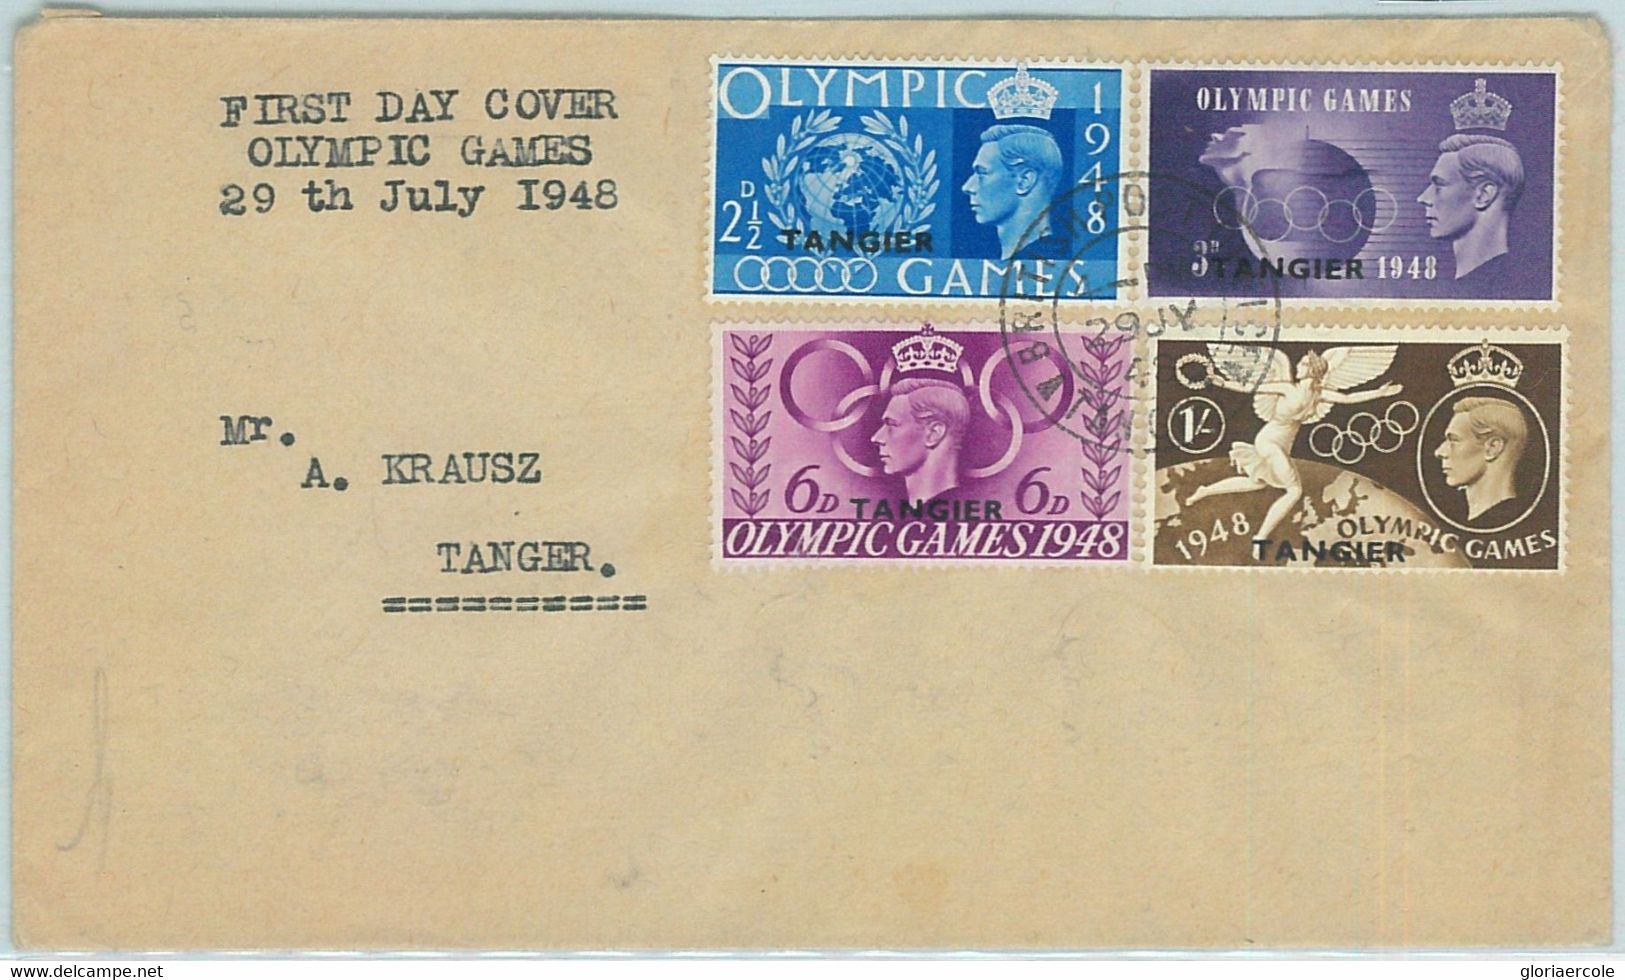 68020 -  TANGIER - POSTAL HISTORY -  1948  Olympic Games  FDC Cover! - Summer 1948: London